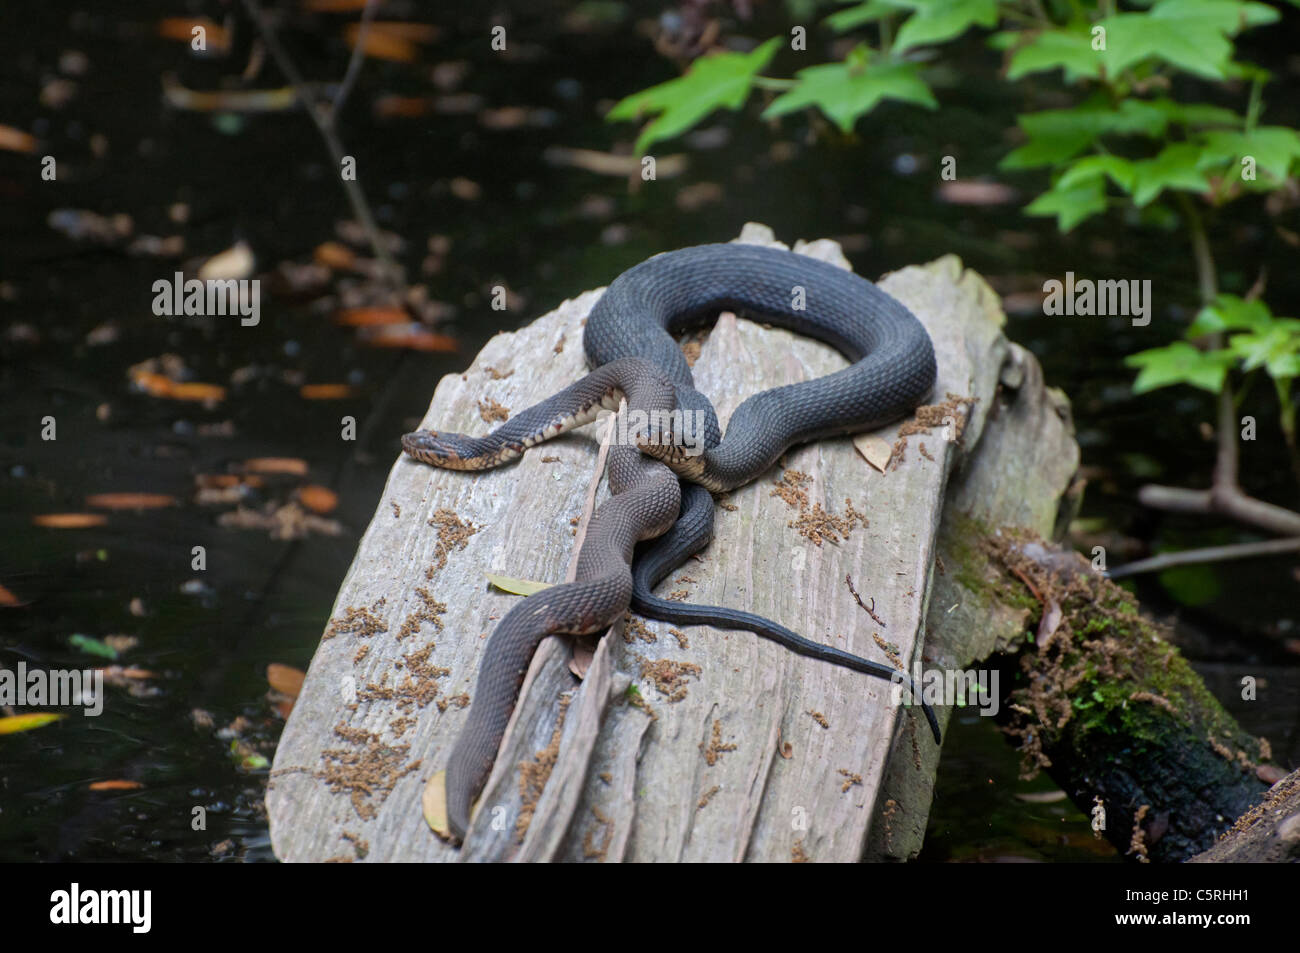 Santa Fe College Teaching Zoo Gainesville Florida. A Florida pond. Two yellow bellied water snakes. Stock Photo